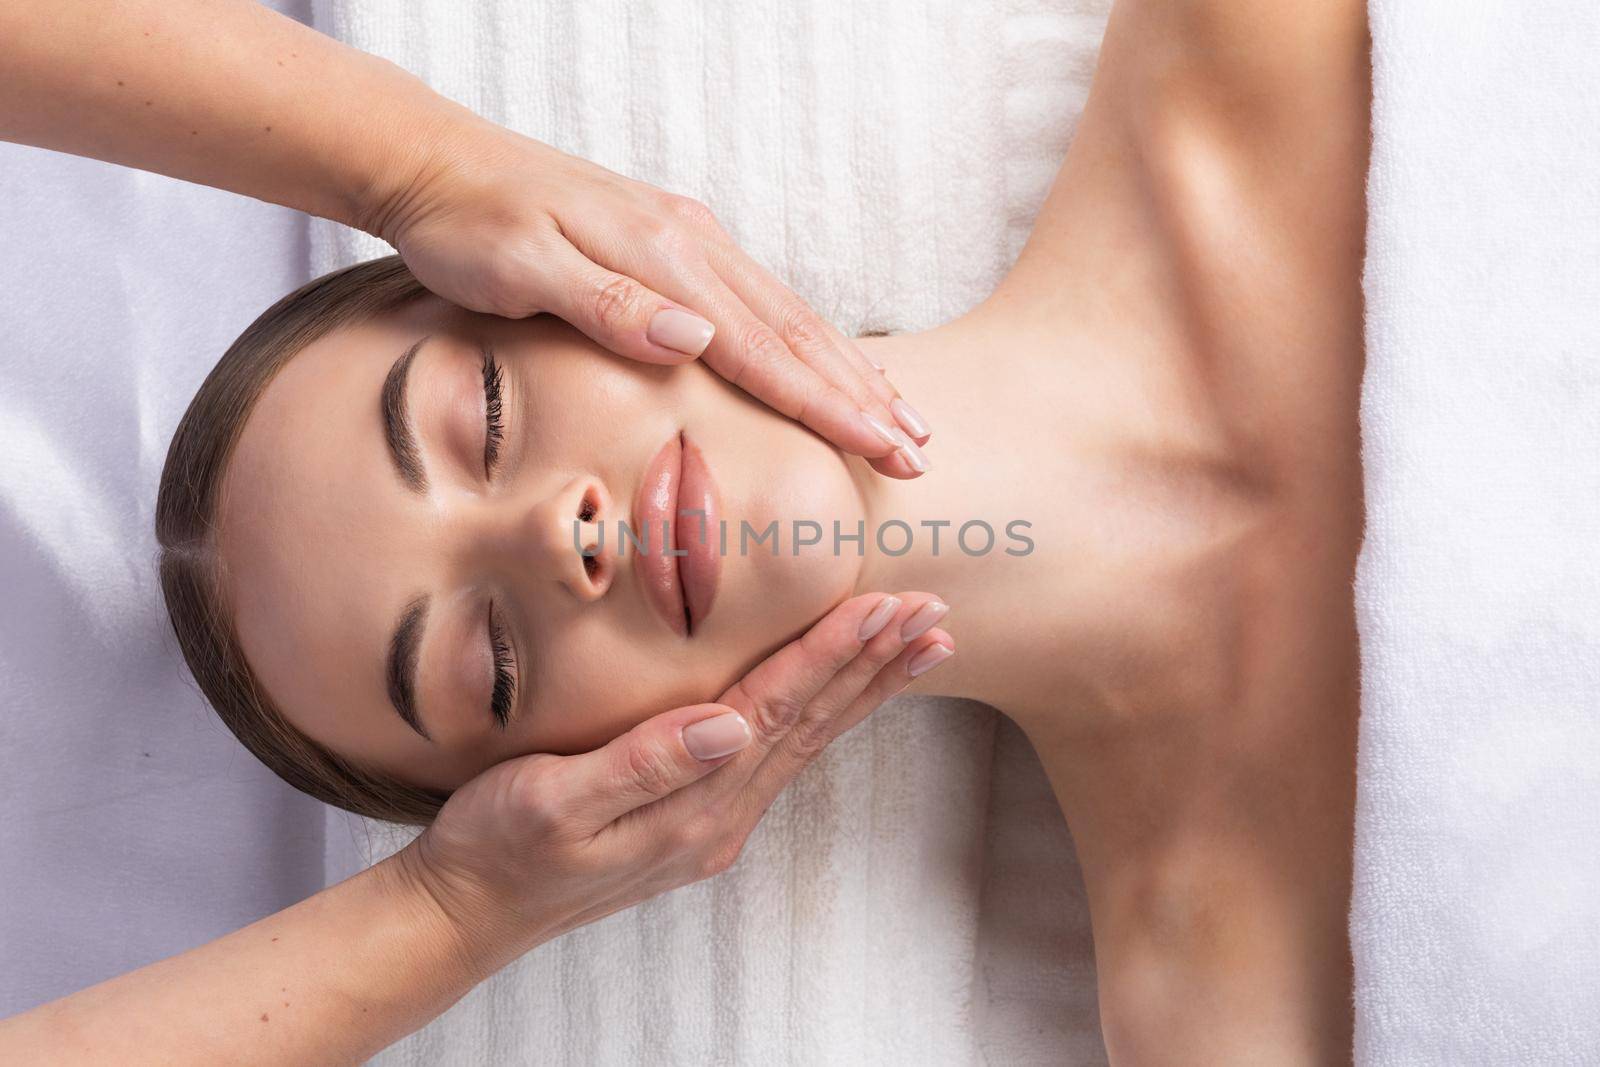 Releasing stress. Top view of beautiful young woman lying on back while massage therapist massaging her face